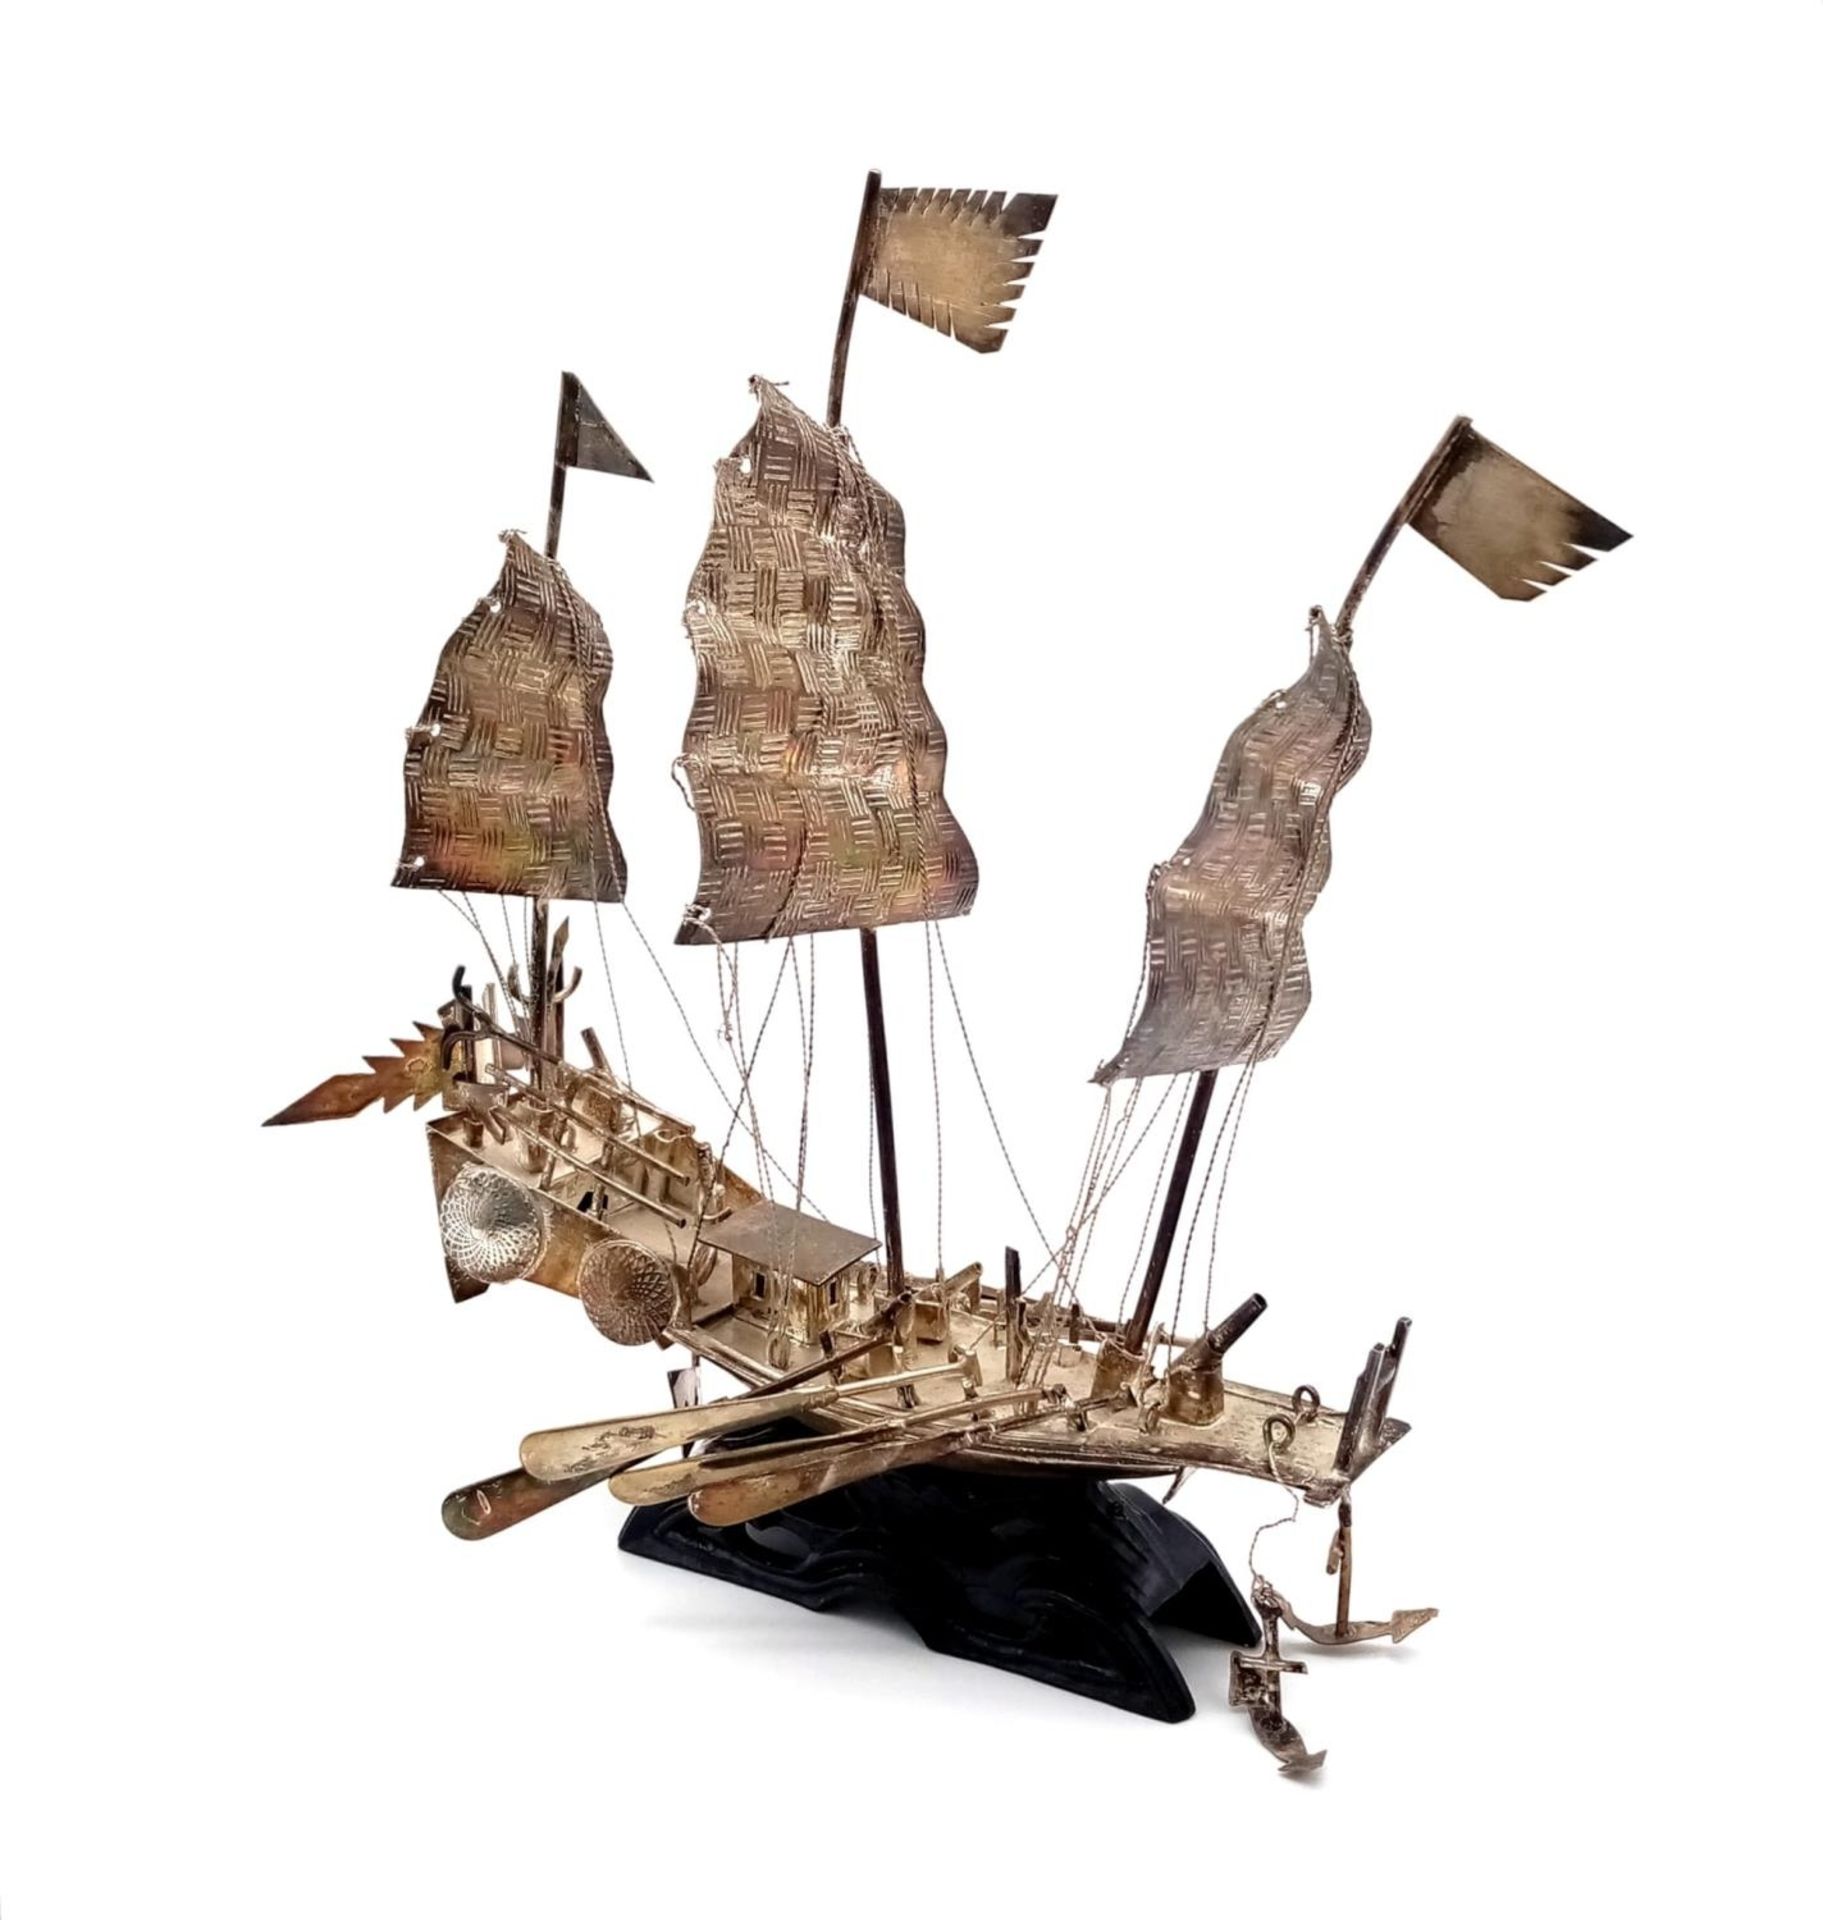 Early Chinese Silver (tested) Warship Model. Excellent detail with rigging, cannons and oars.